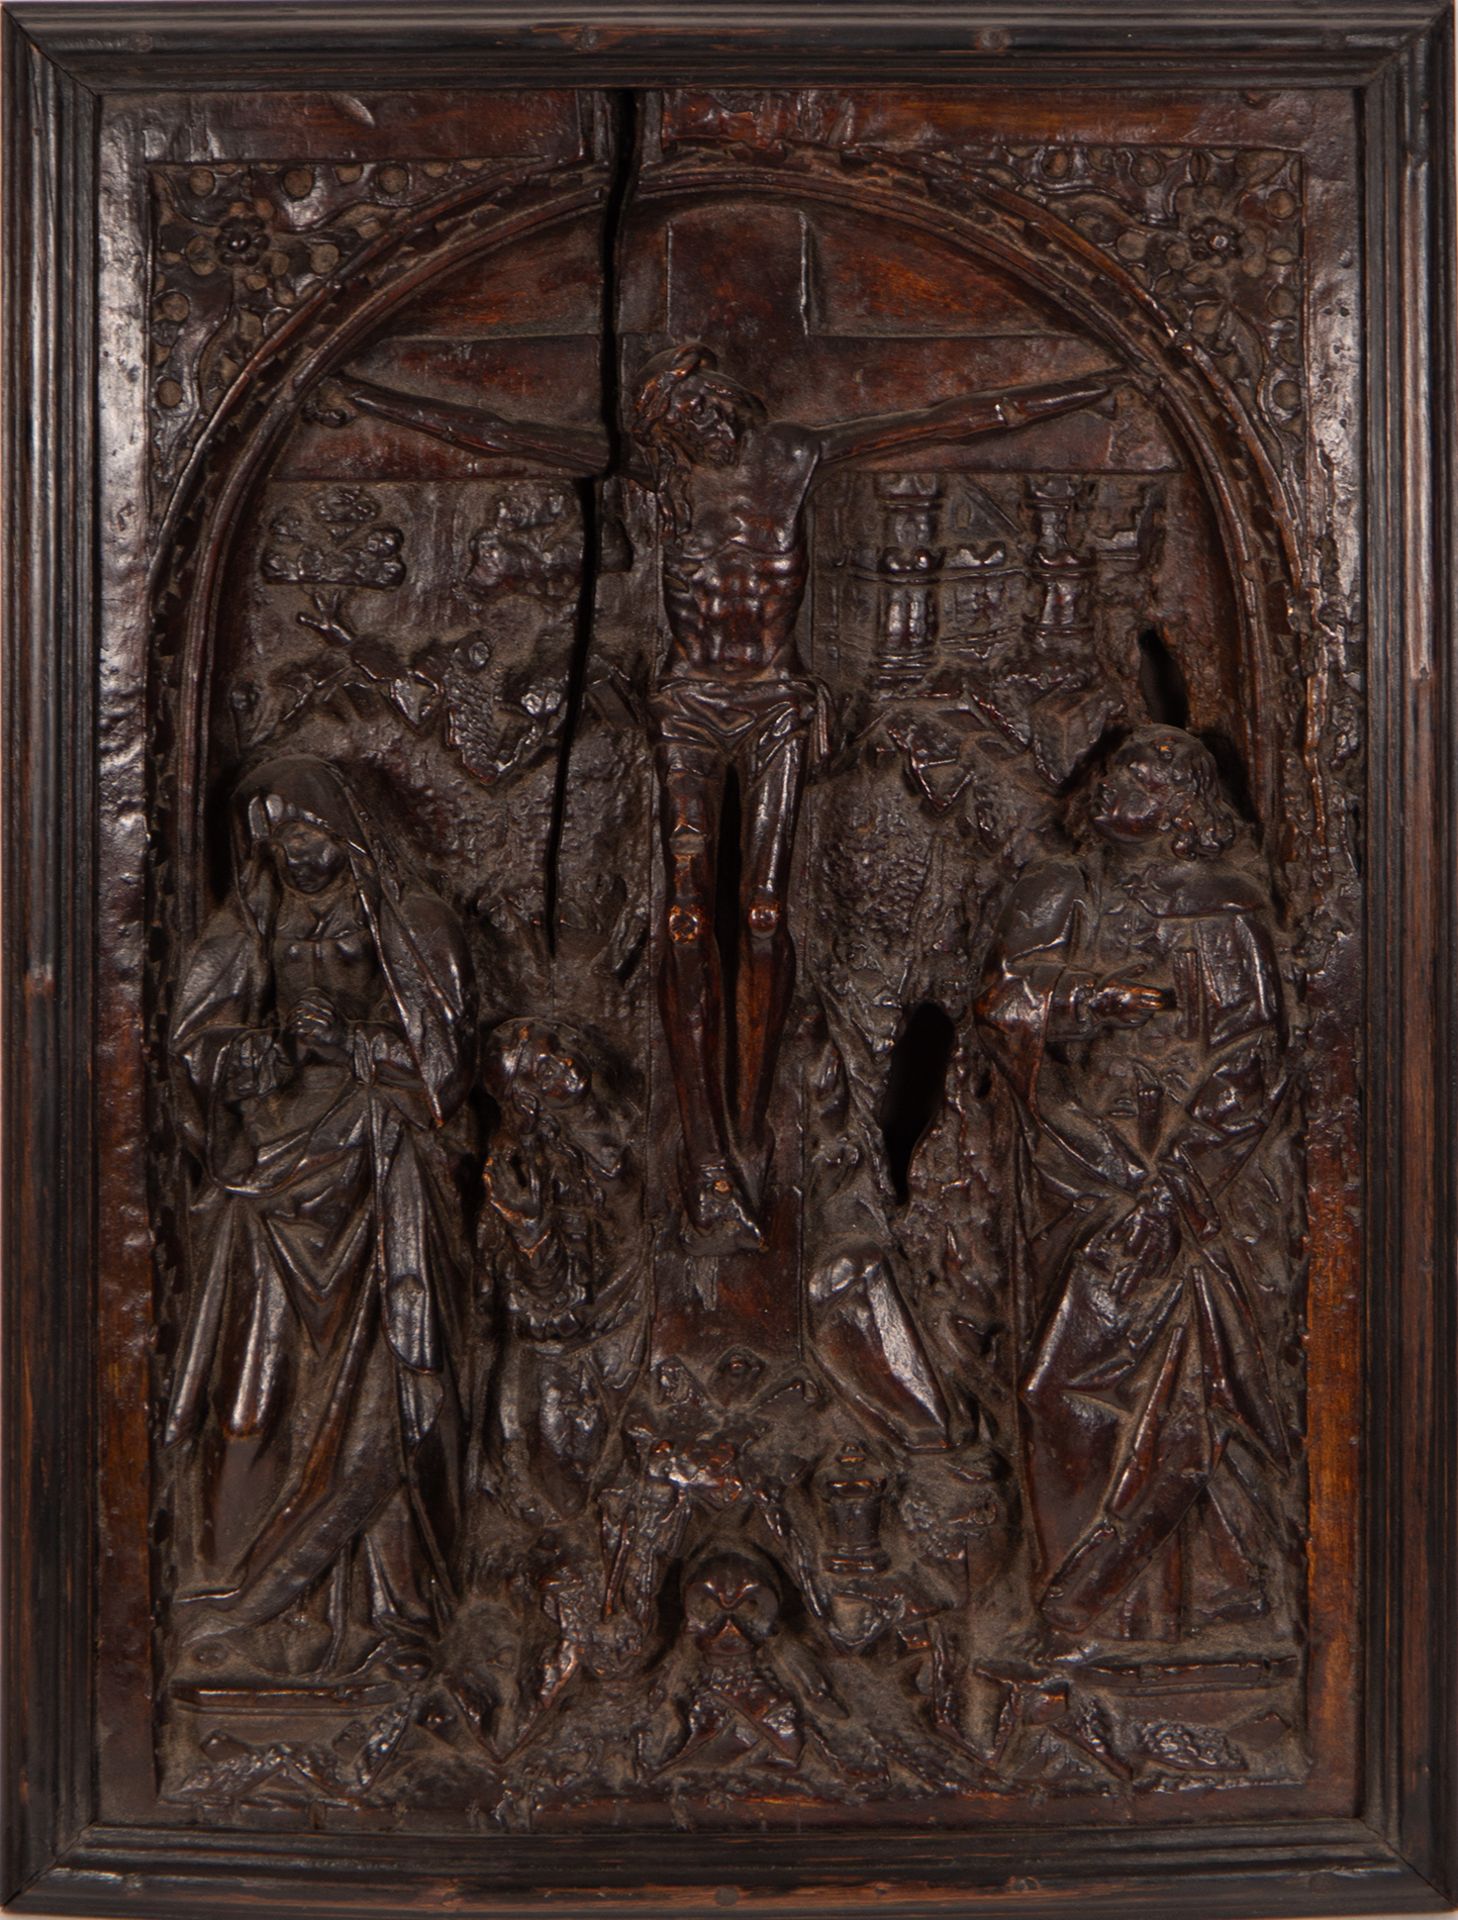 Important Calvary in Relief, German school of the 16th century